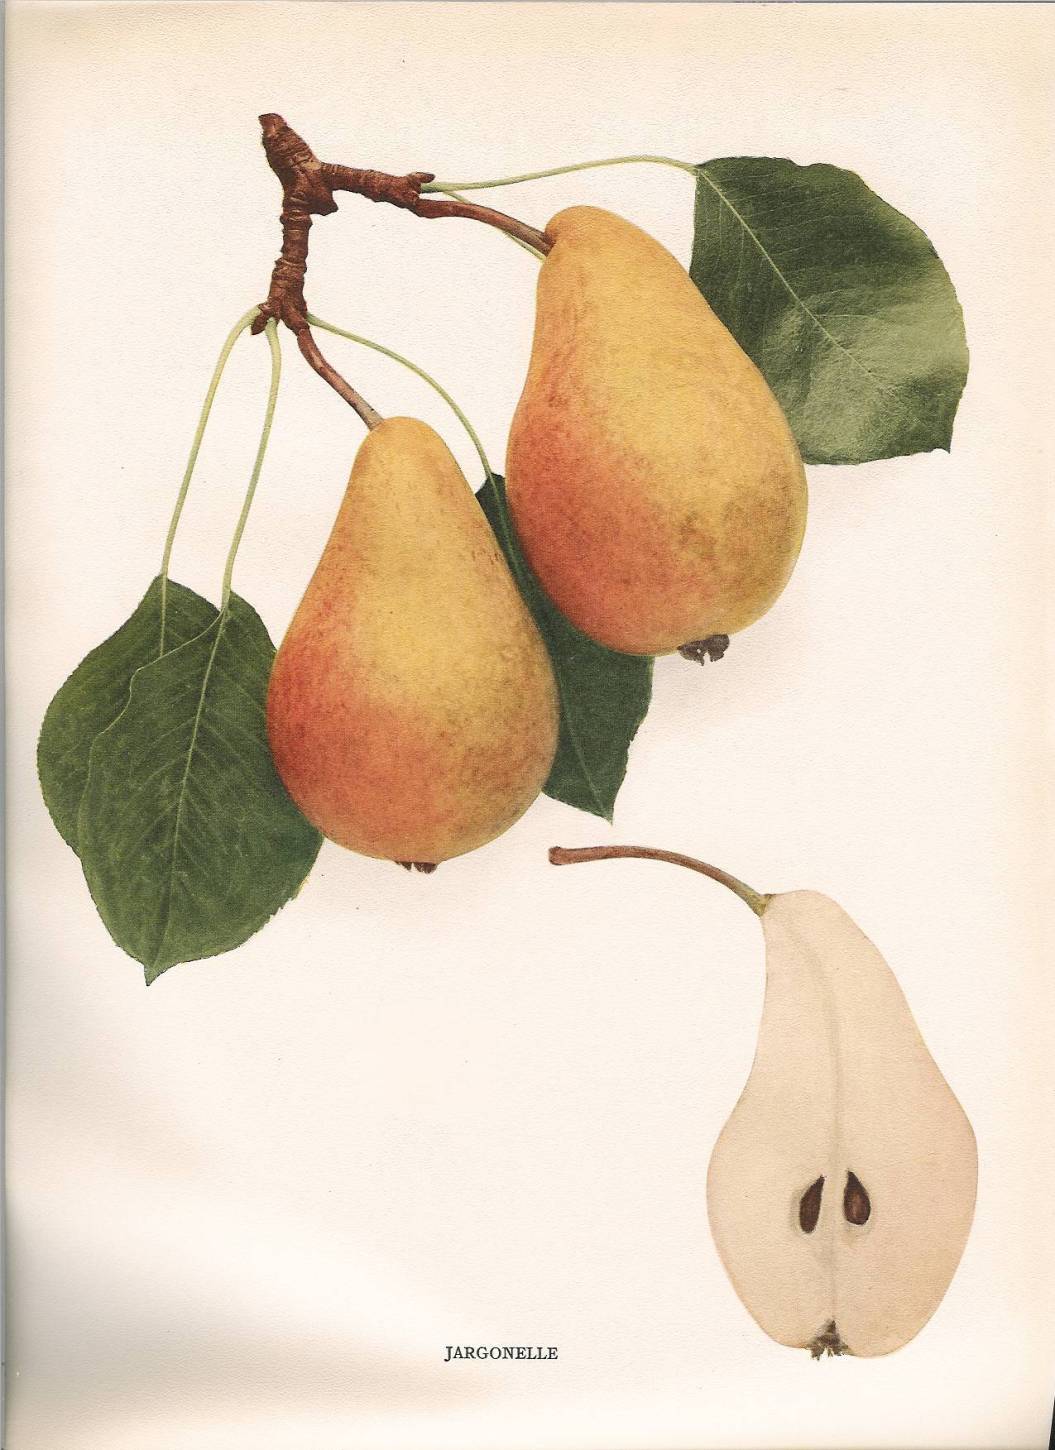 PEARS OF NEW YORK